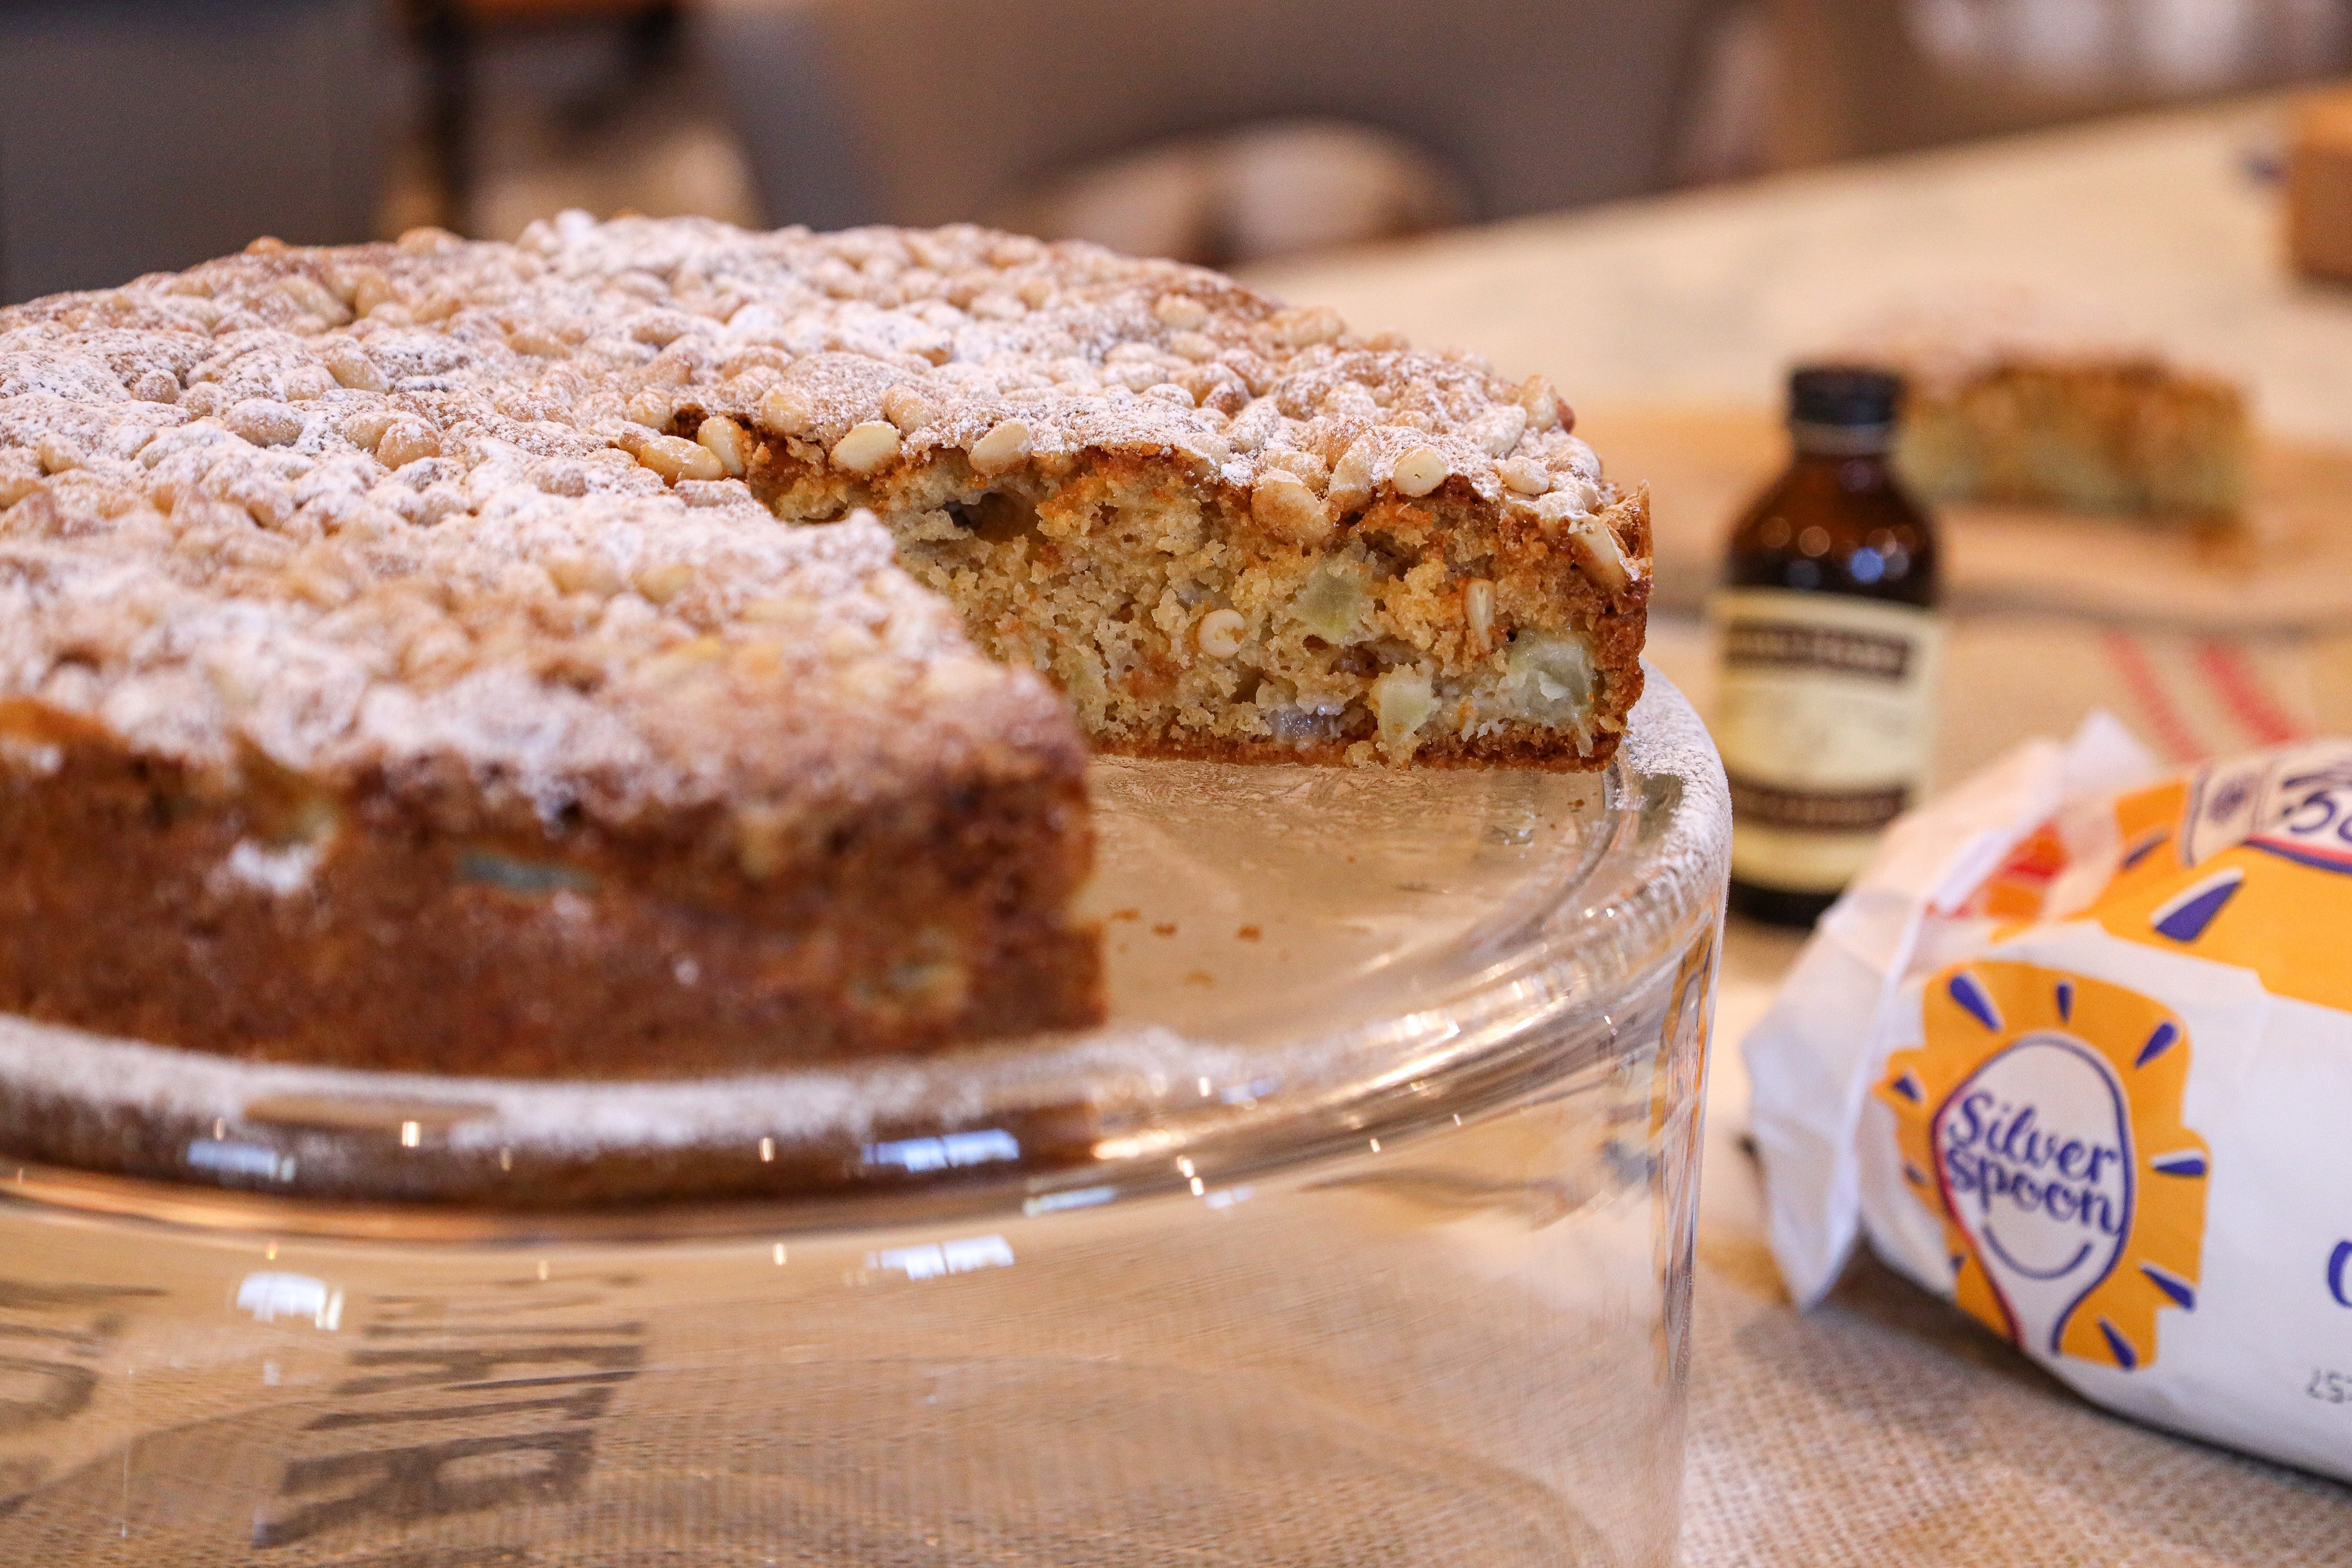 Apple cake with slice cut out, sugar pack and vanilla bottle in background